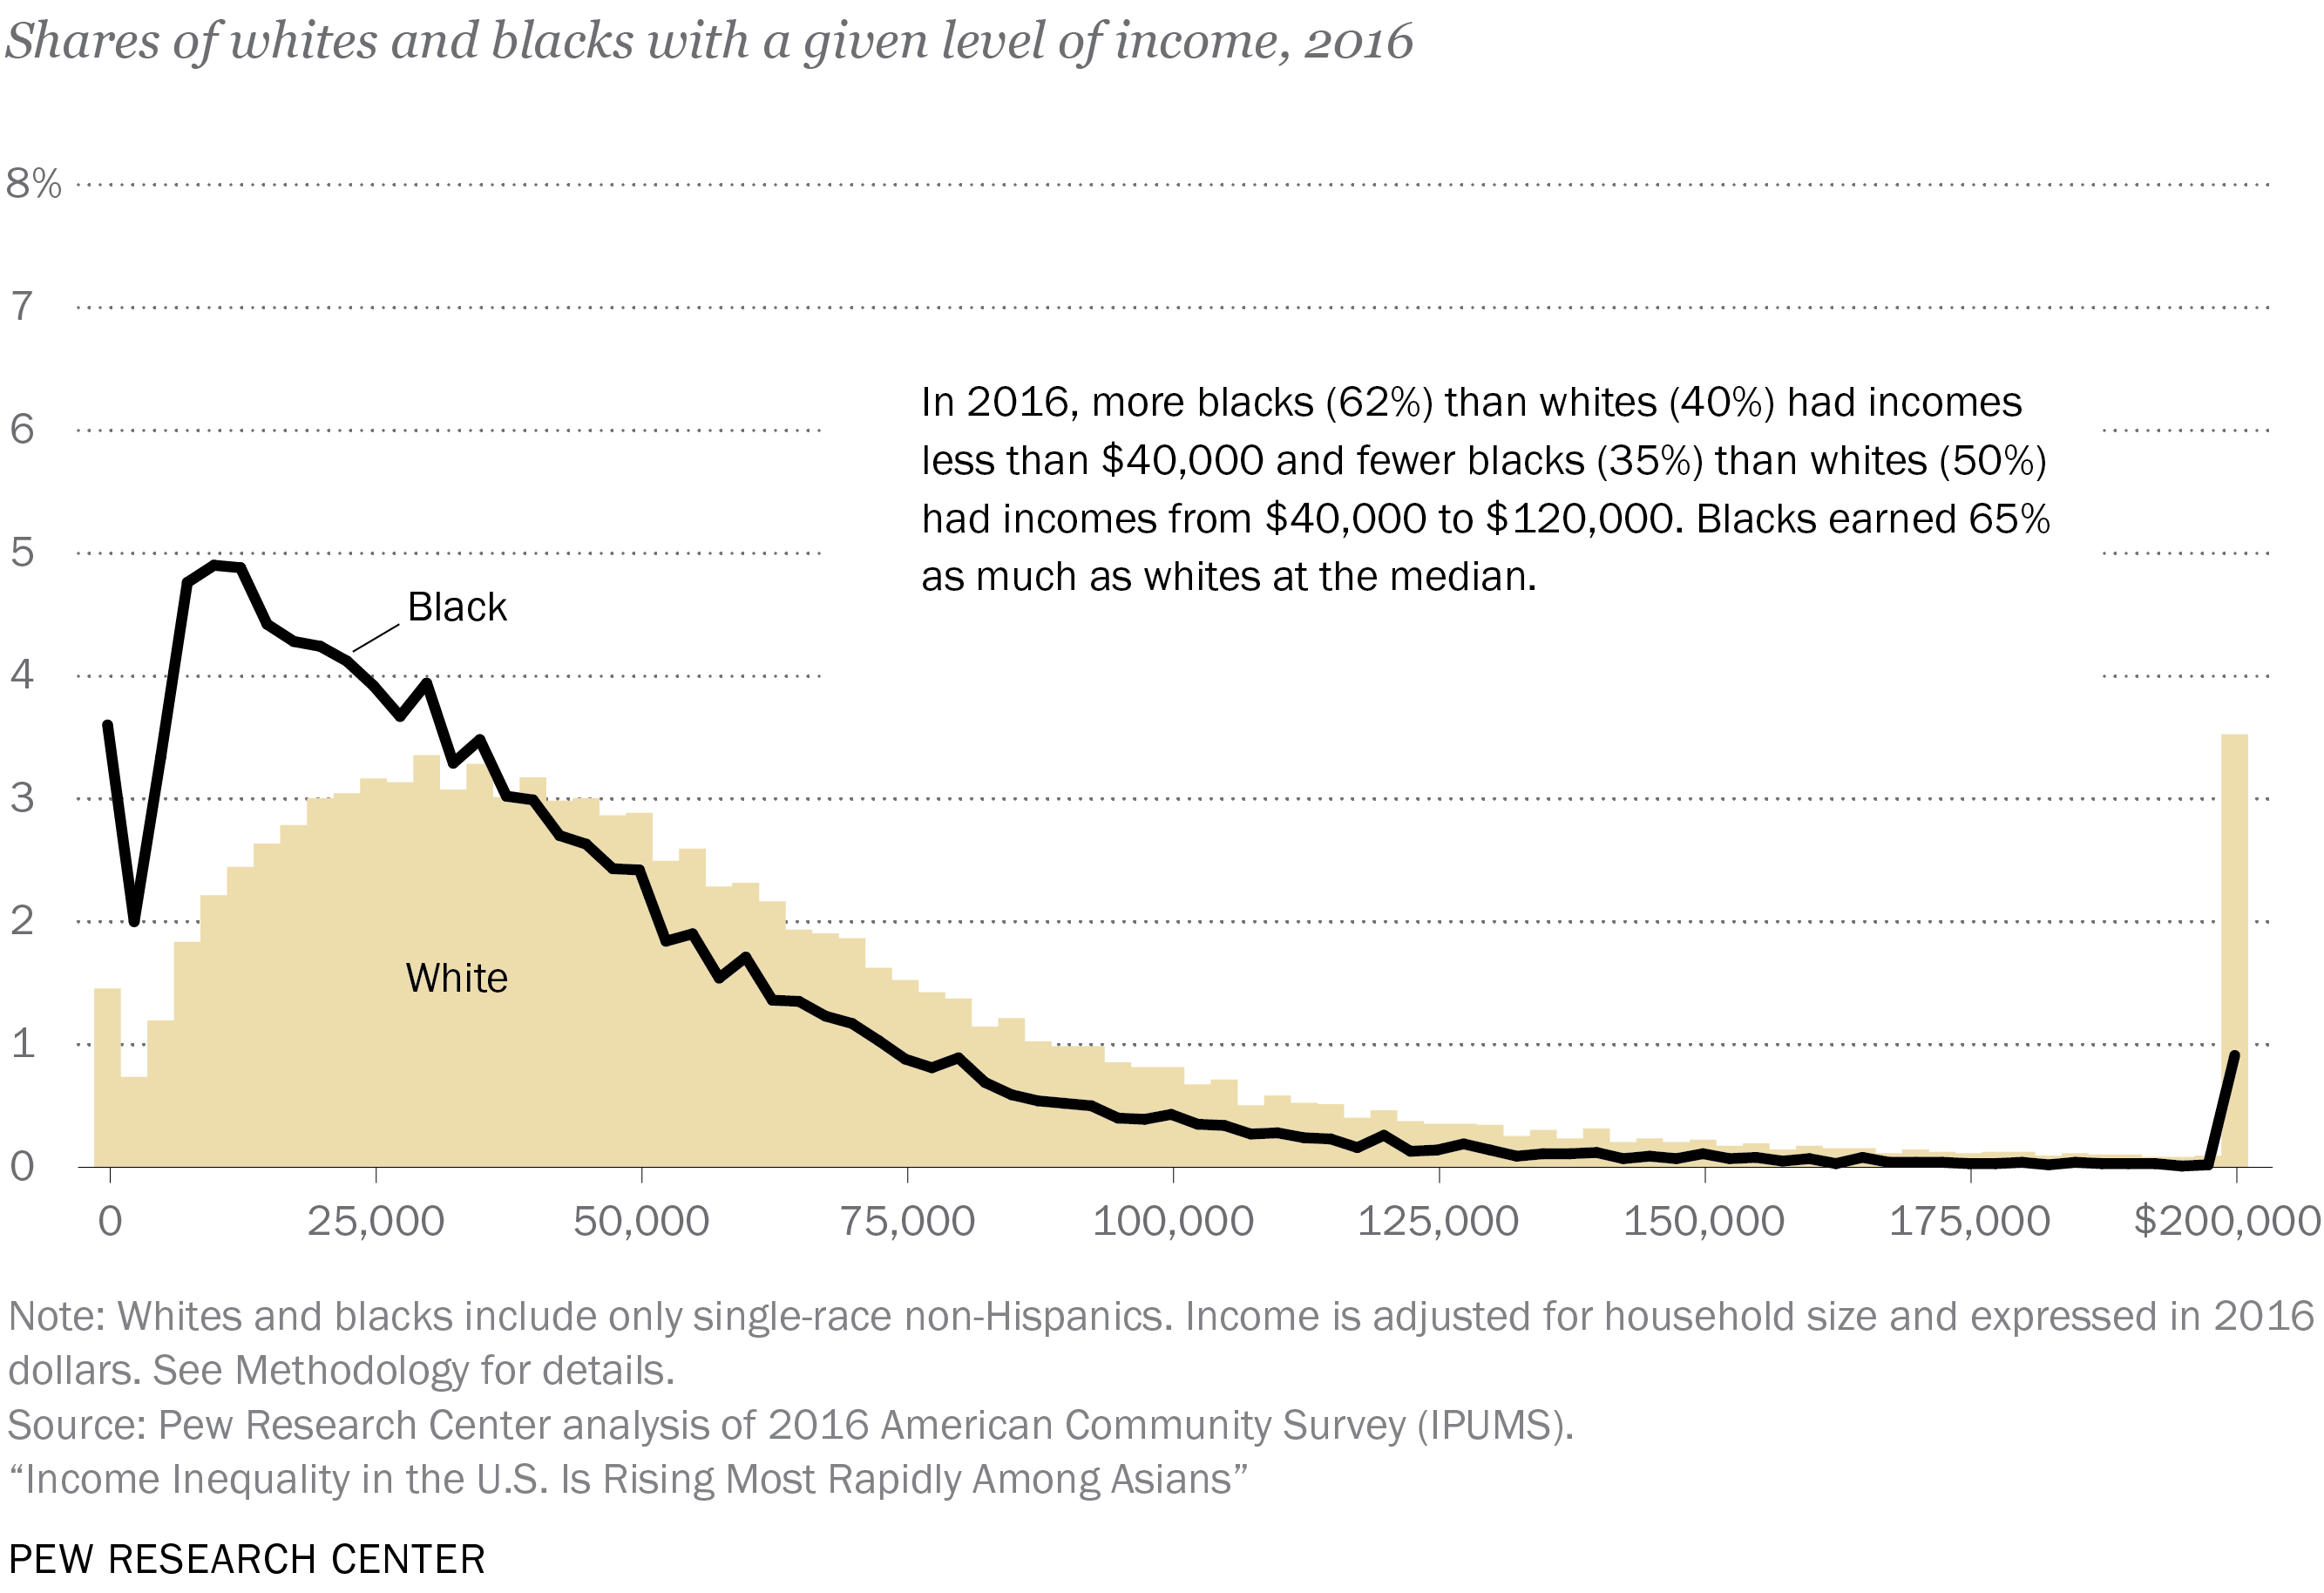 Share of whites and blacks with a given level of income, 2016